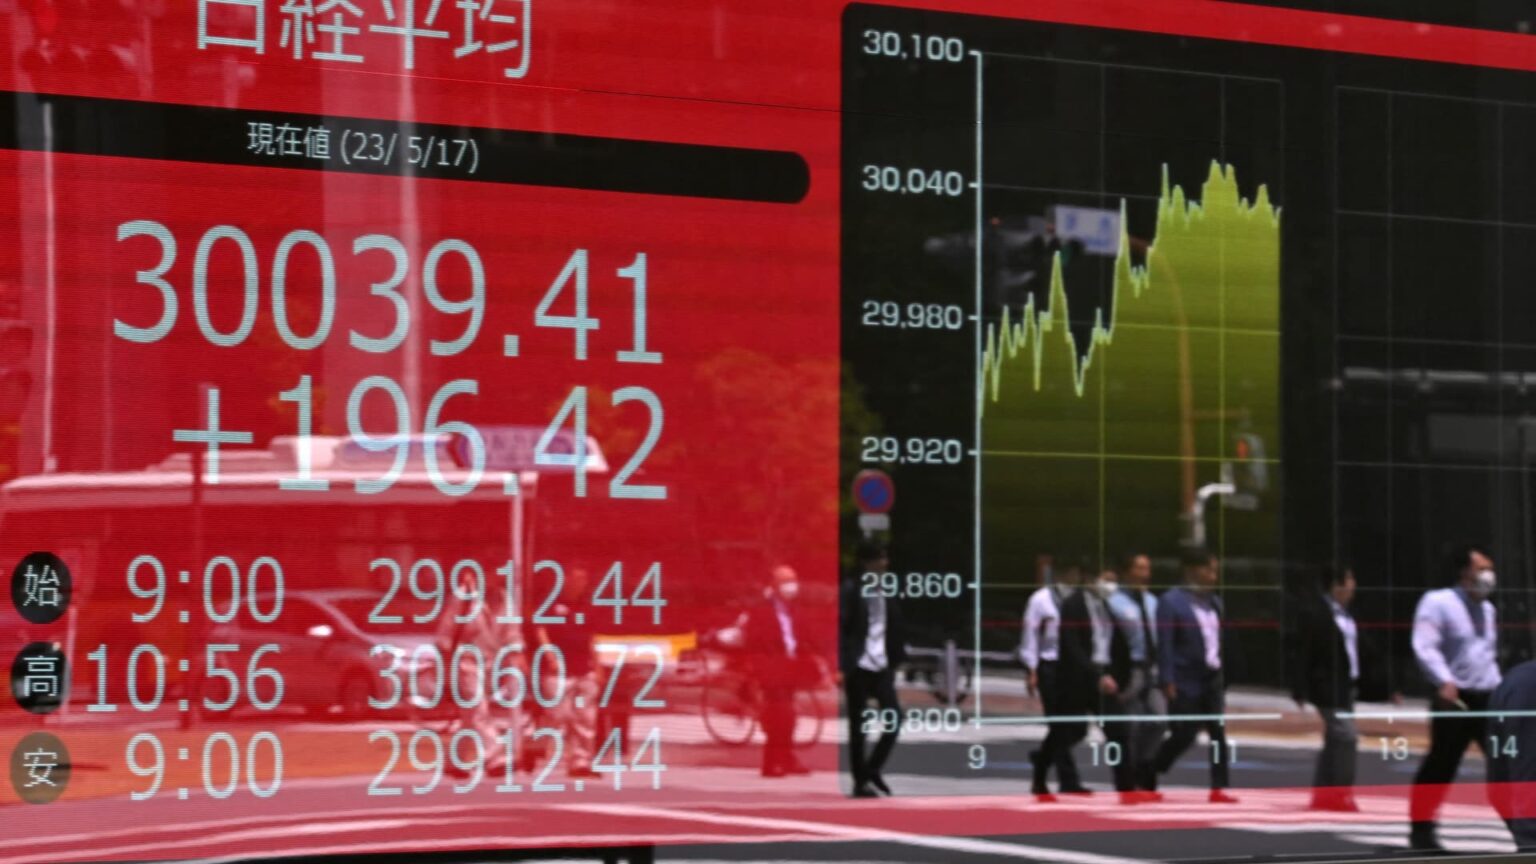 Asian markets were mixed during US debt ceiling talks